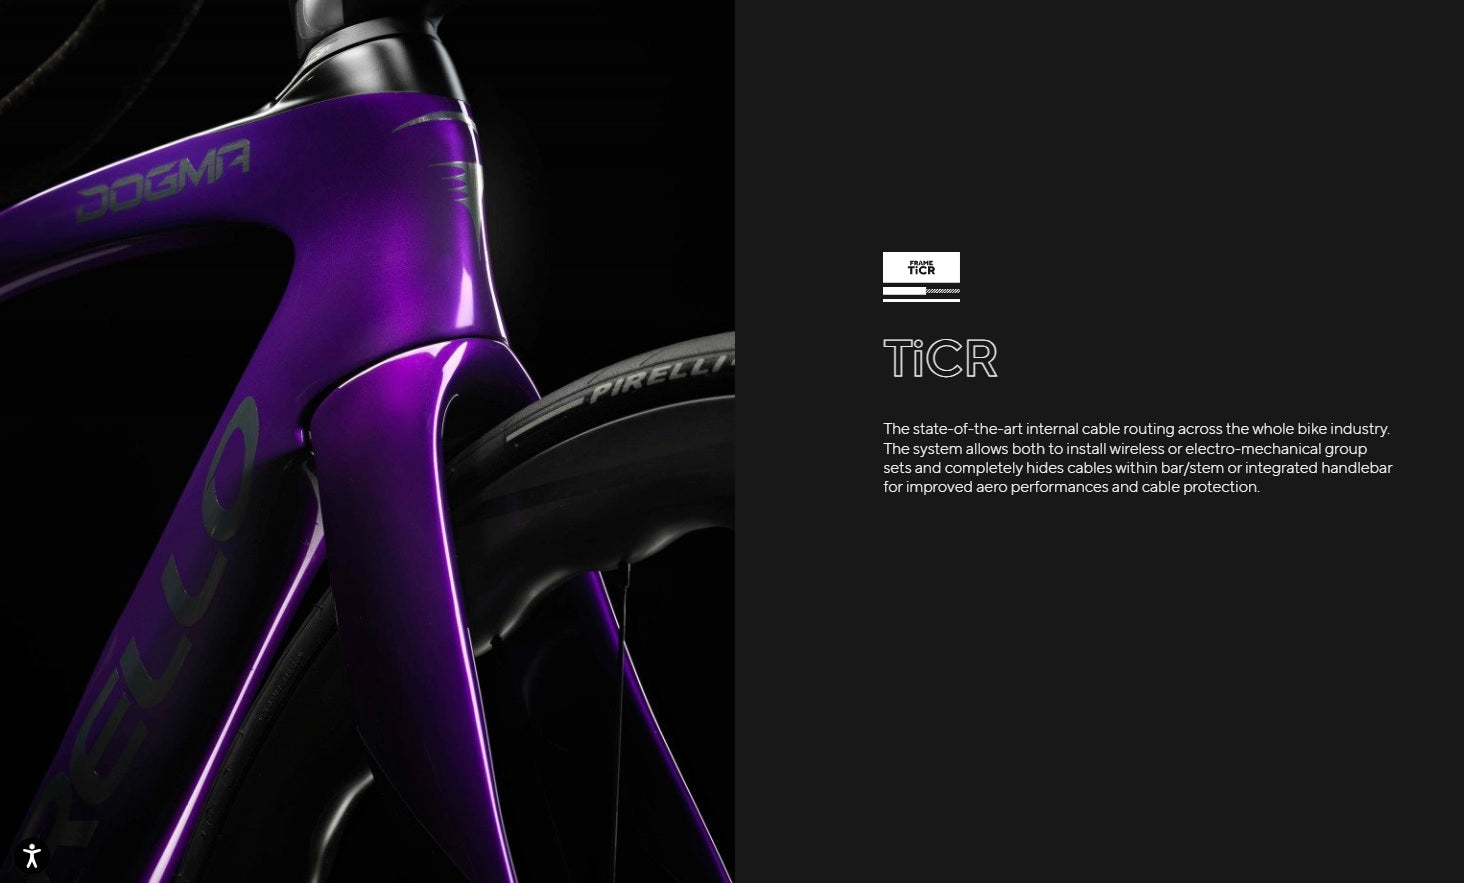 The Pinarello Dogma X road bike has some exciting new seat stays